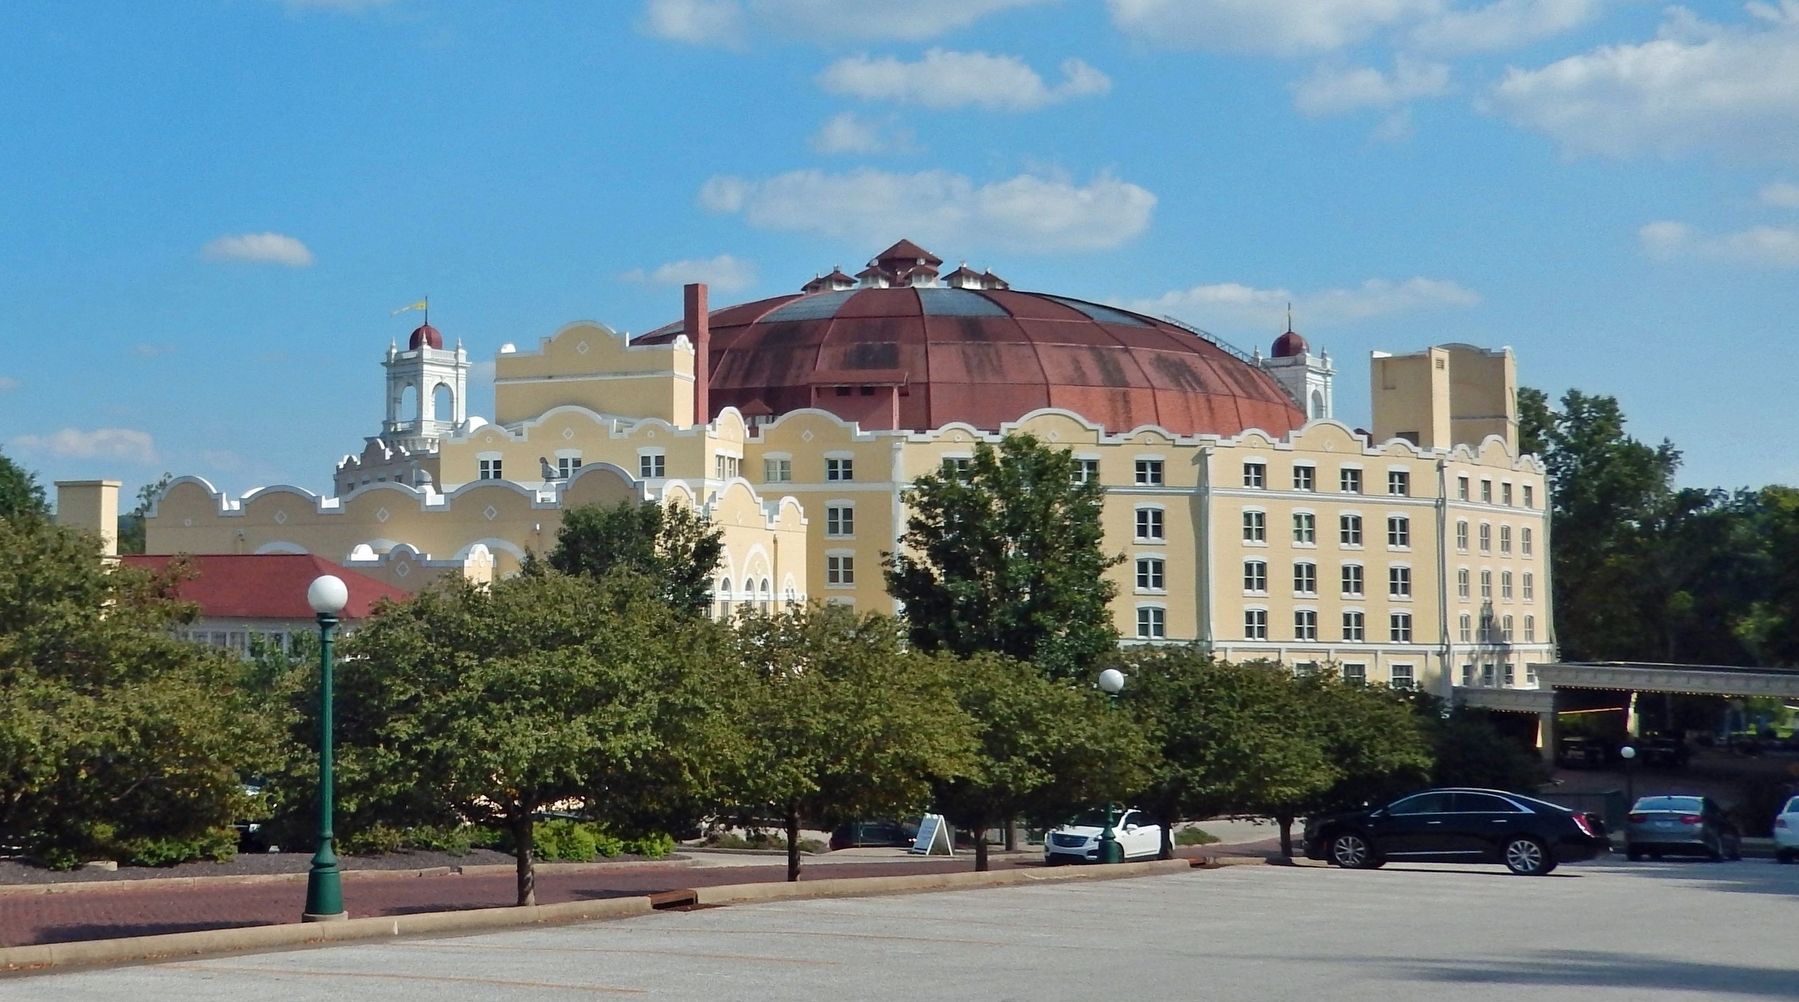 West Baden Springs Hotel Dome image. Click for full size.